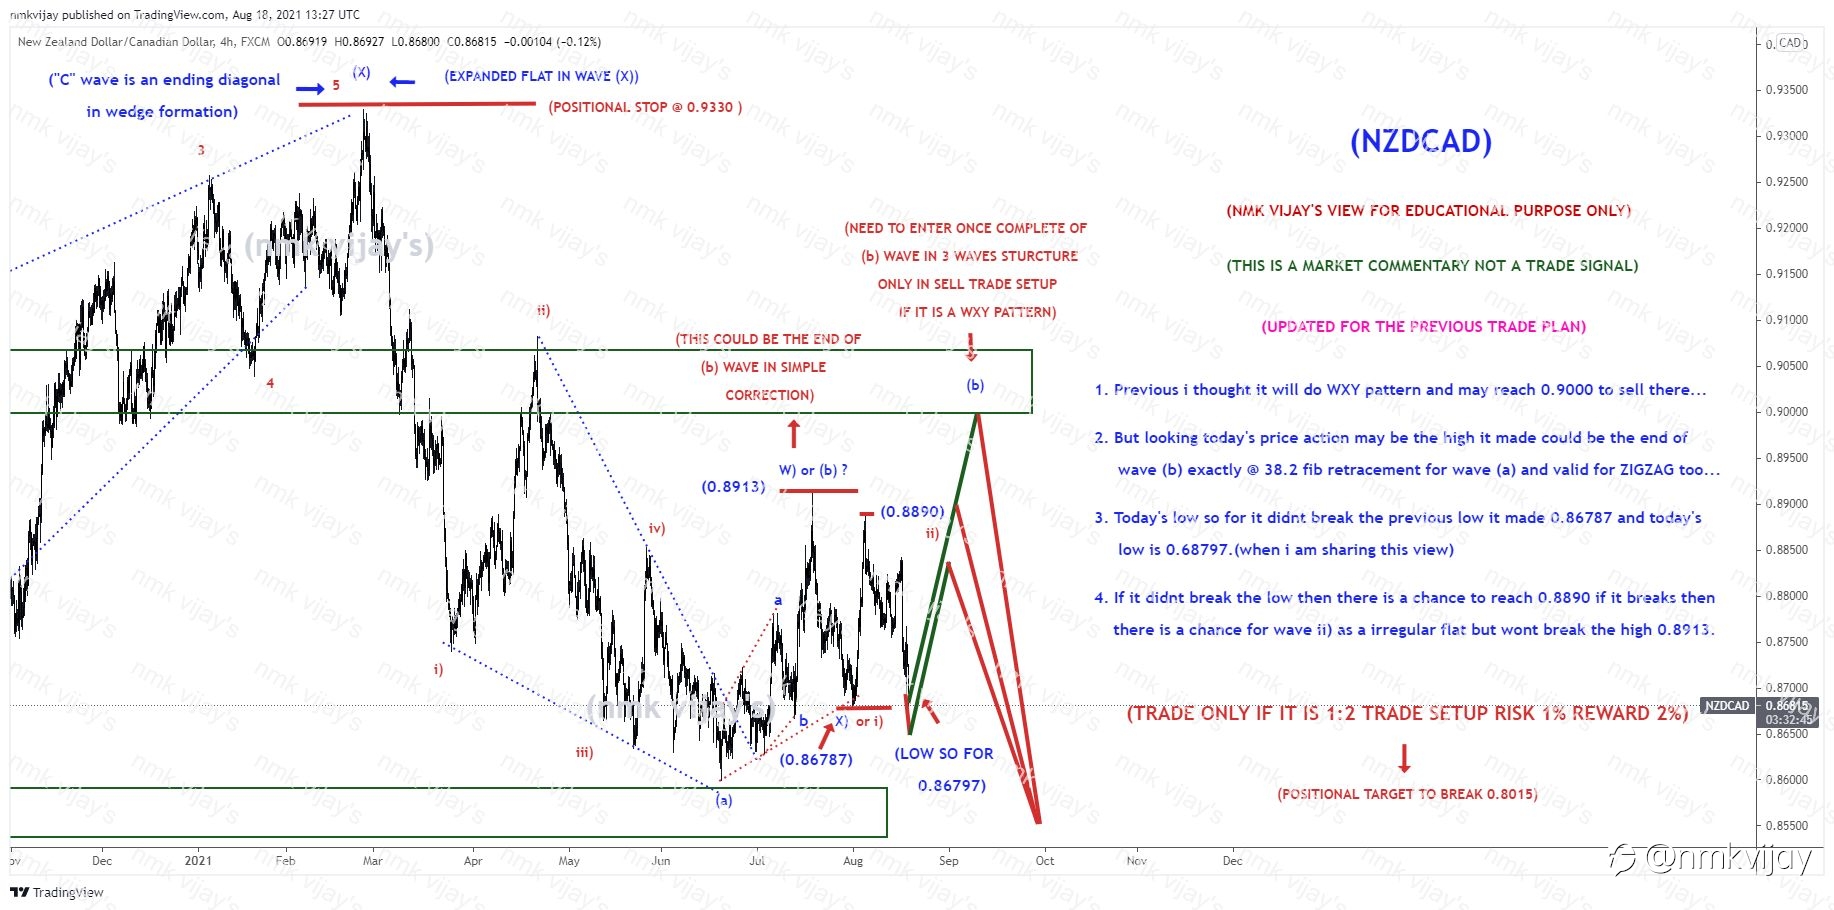 NZDCAD- Will reach near to previous high or wave ii) in progress?